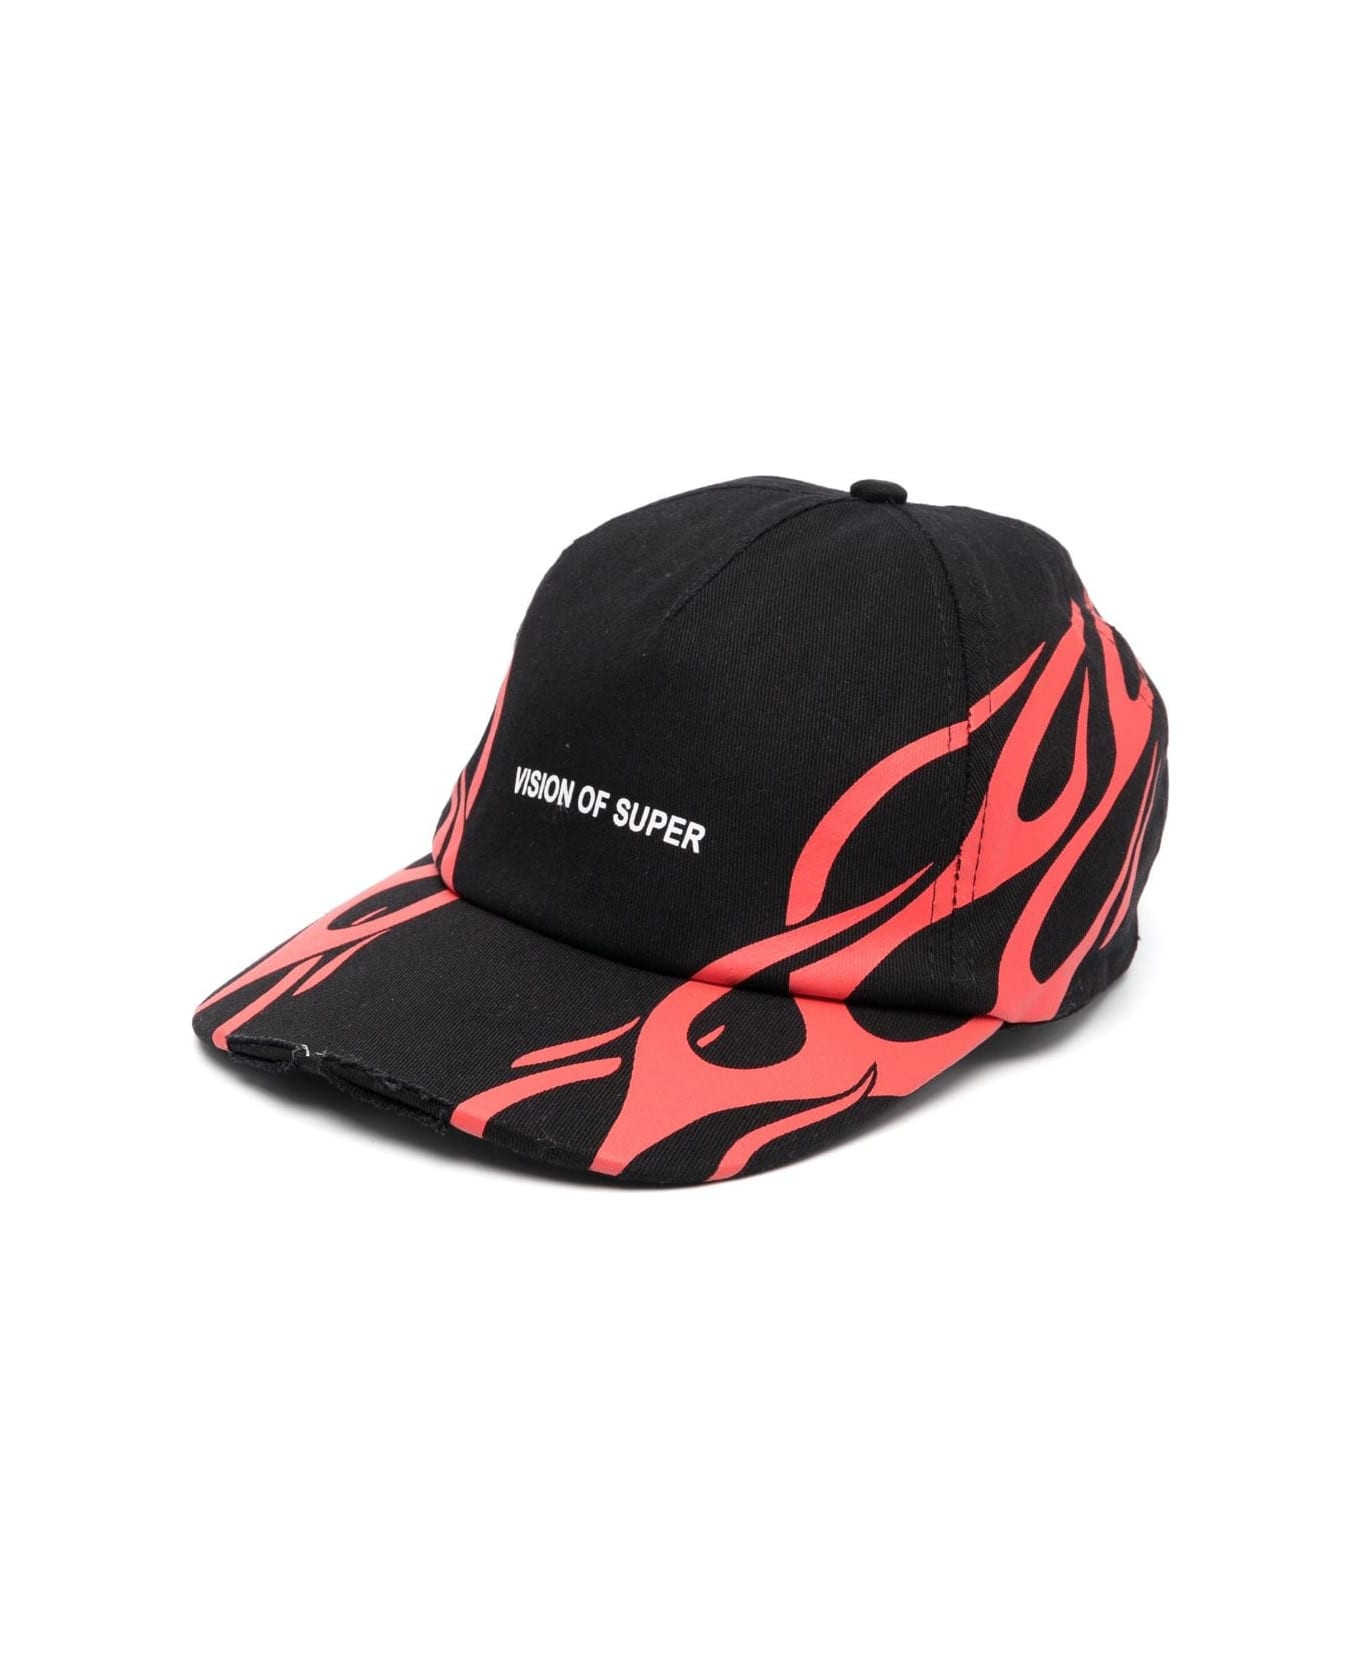 Vision of Super Black Cap With Red Tribal Print - Black Red